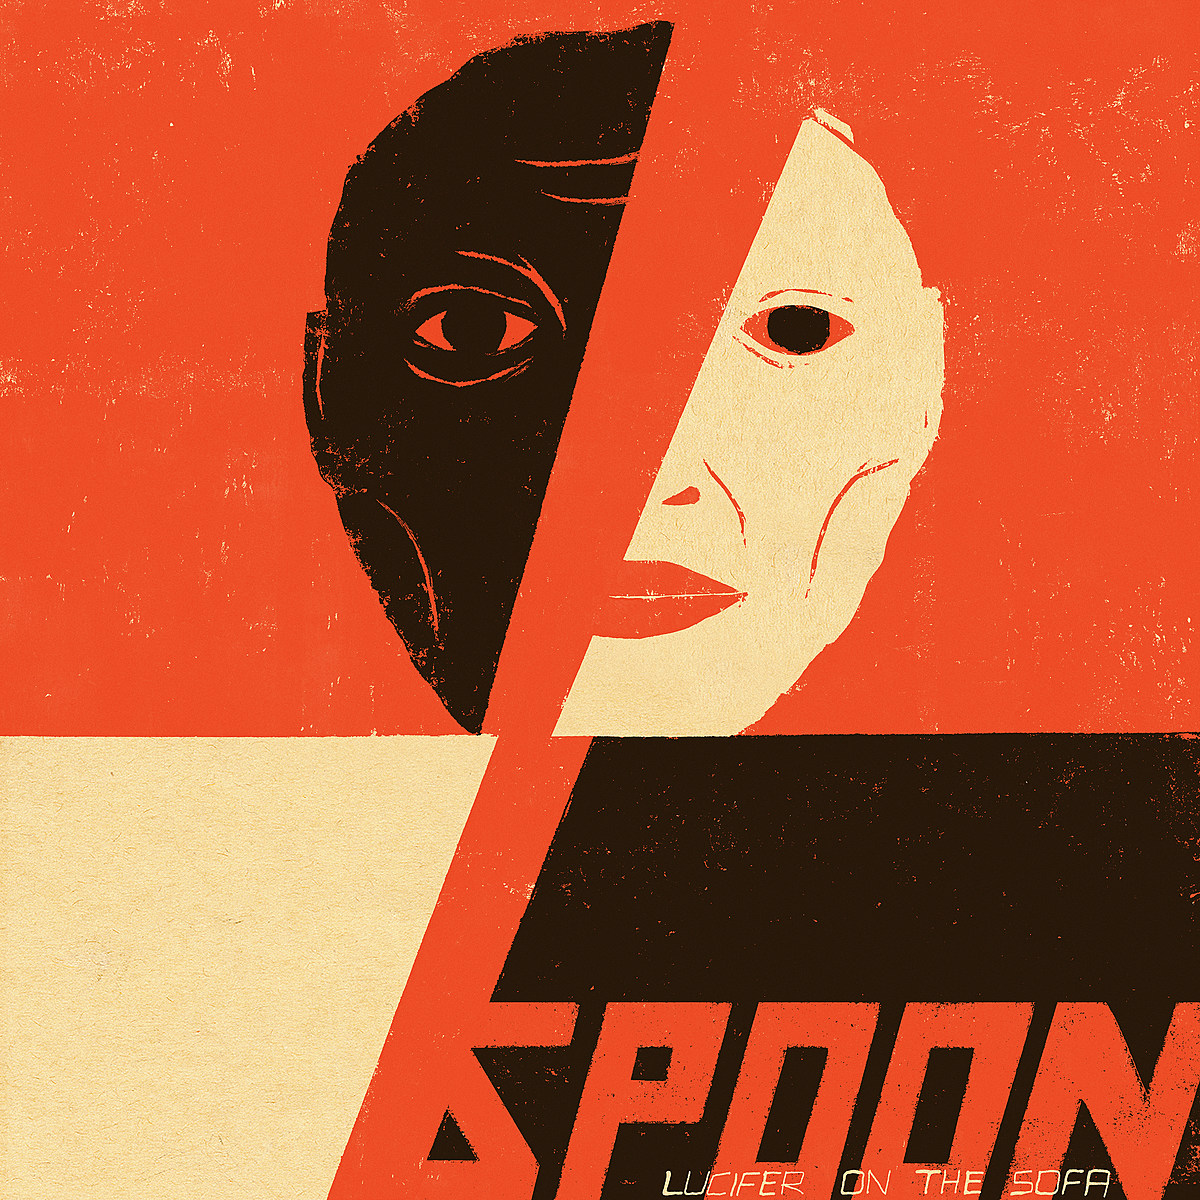 Review: Spoon still have the spark on 10th album 'Lucifer on the Sofa'